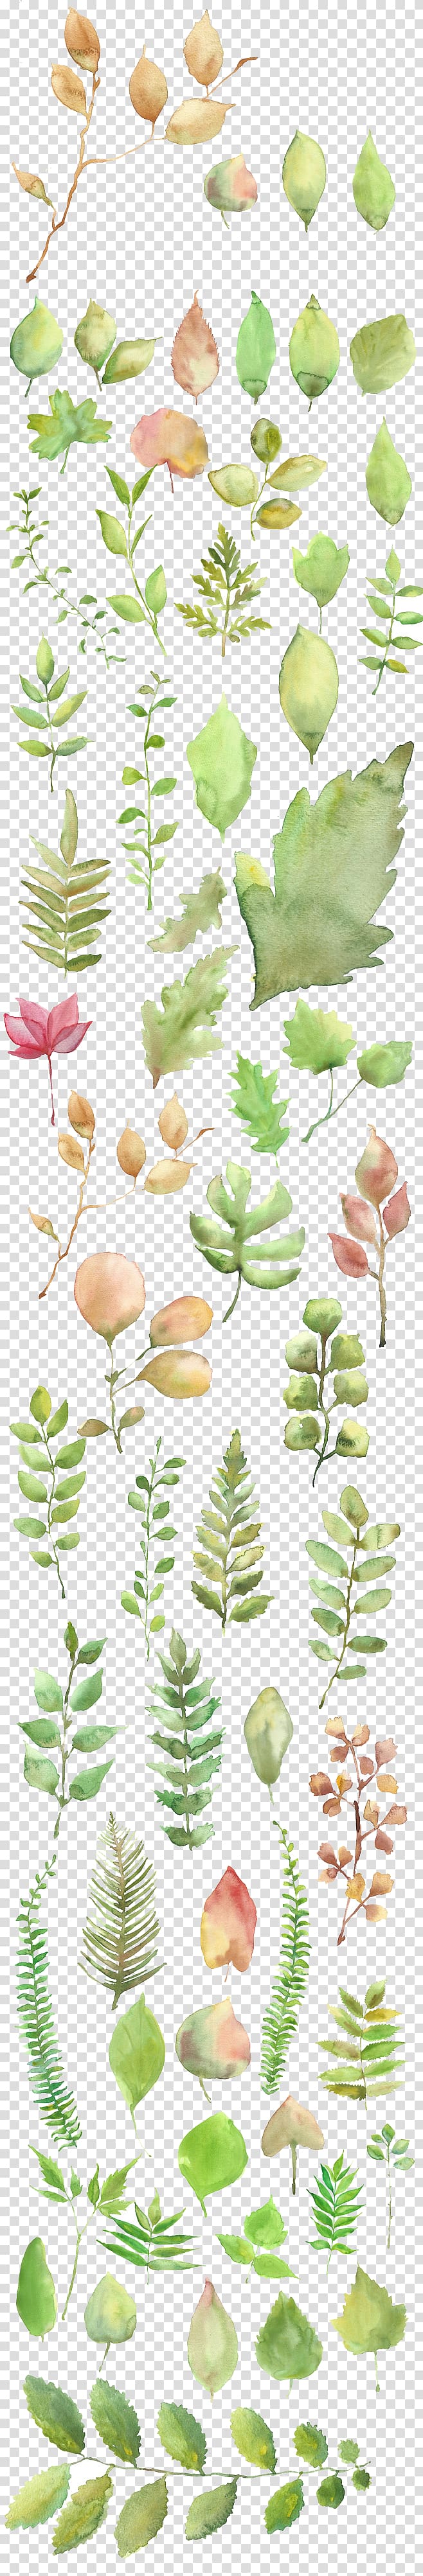 green leaves illustration, Watercolor painting Shading, Watercolor leaves shading material transparent background PNG clipart